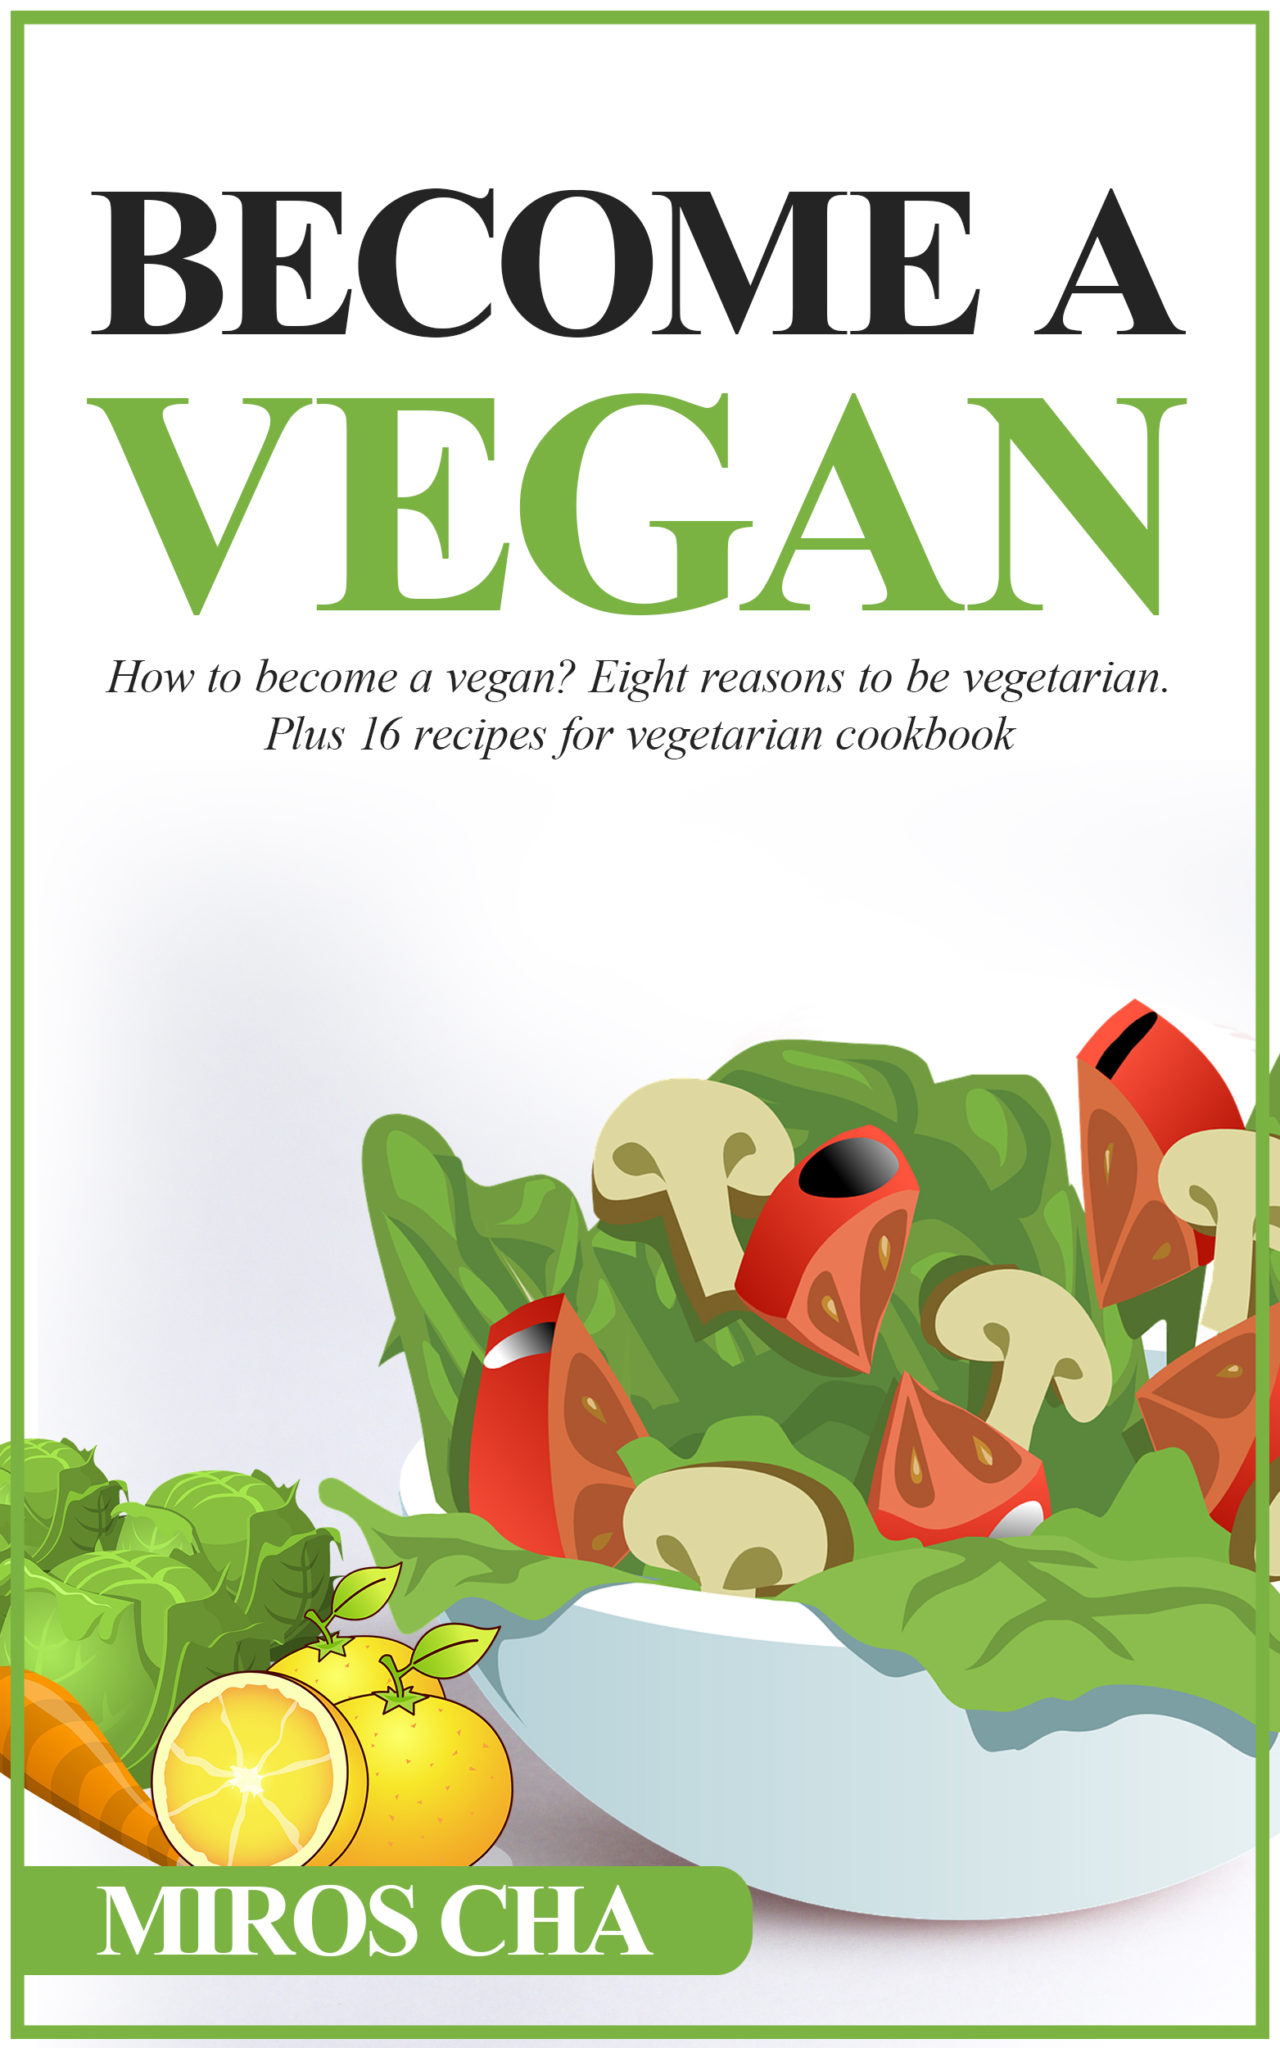 FREE: Become a Vegan: How to Become a Vegan? Eight Reasons to Be Vegetarian. Plus 16 Recipes for Vegetarian Cookbook by Miros Cha